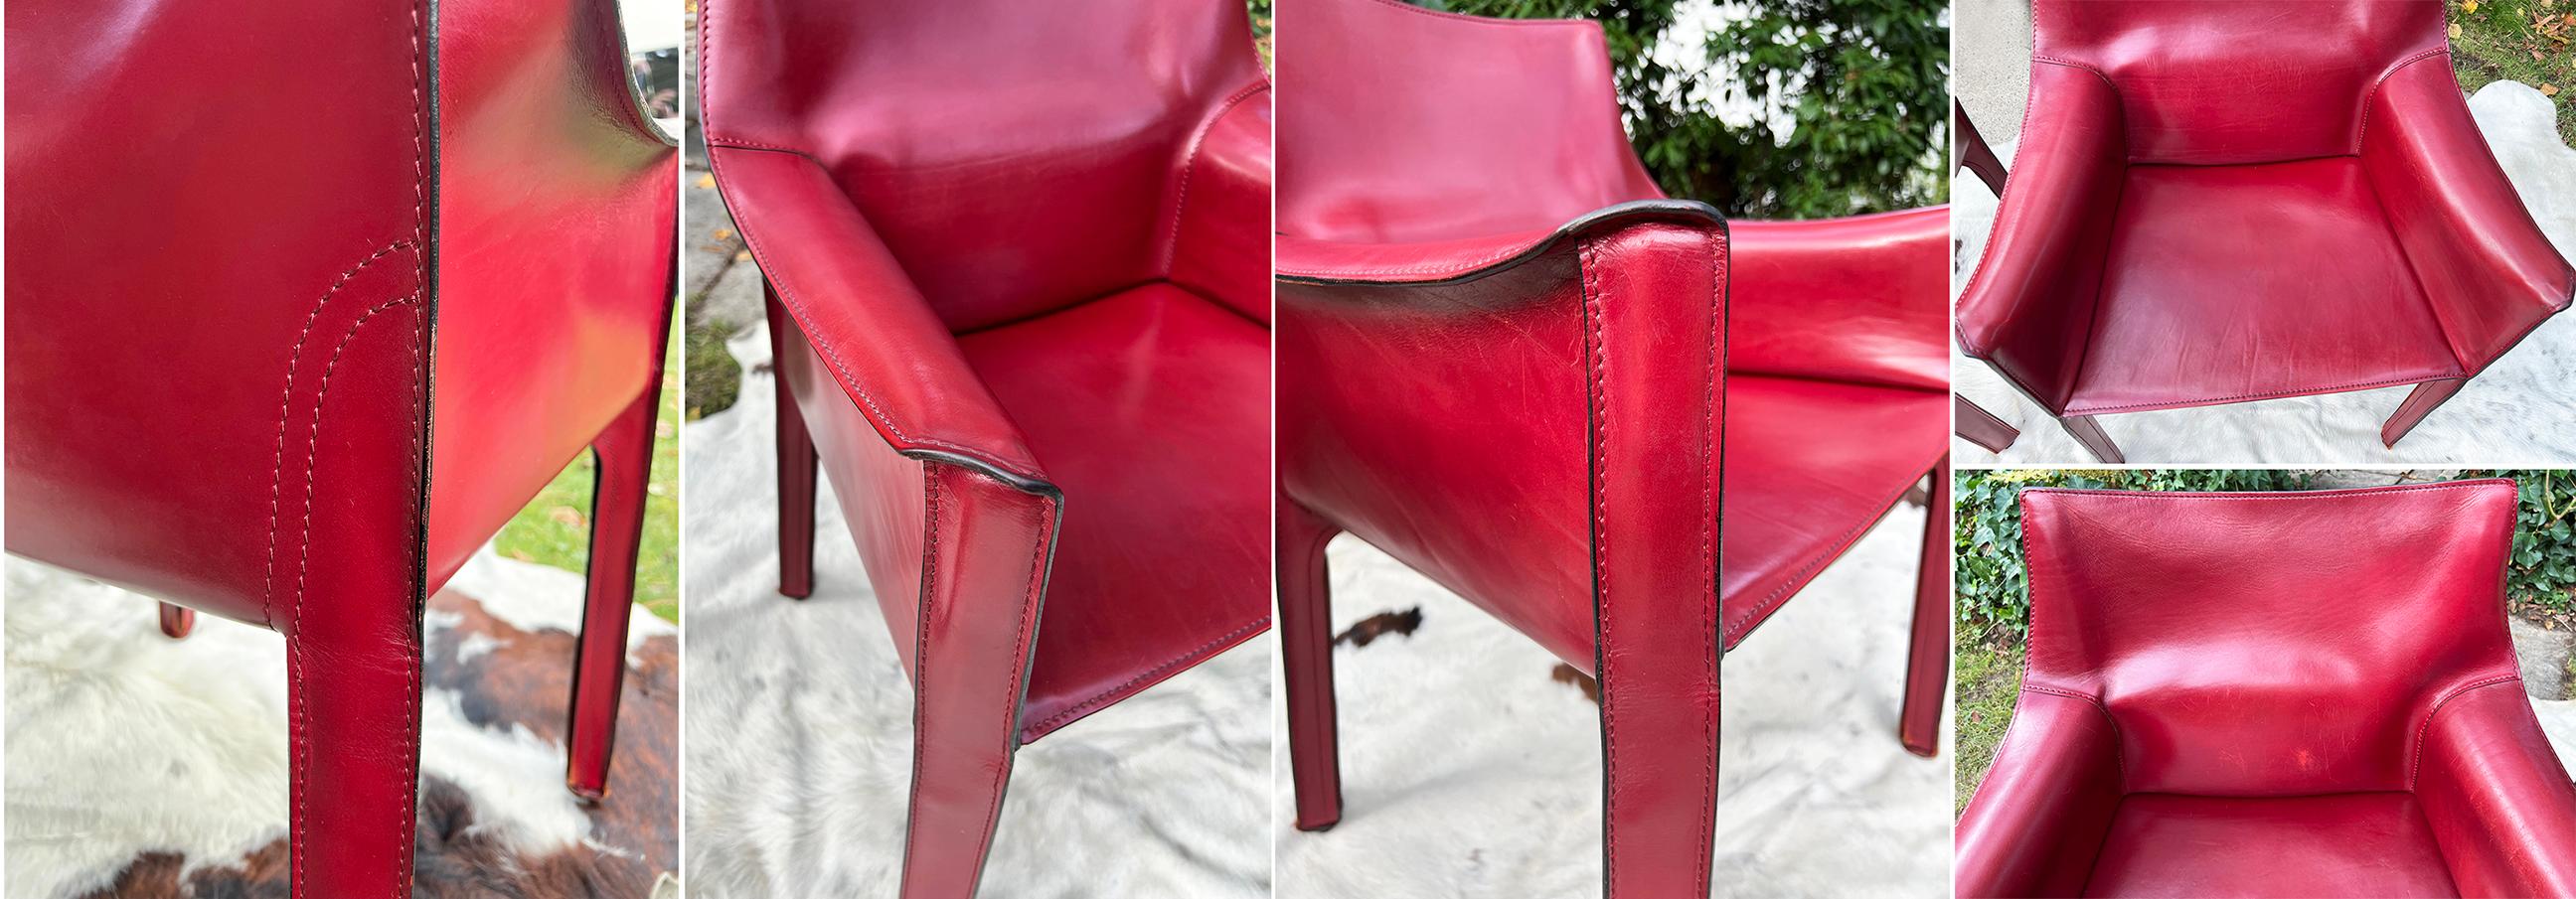 Fabulous Oxblood Color, RARE original Mario Bellini for Cassina 414 Cab Armchairs, PAIR of 2 chairs.

There are 4 available remaining, sold here in pairs.
These chairs make excellent statement pieces in any space.
All are in beautiful leather, with